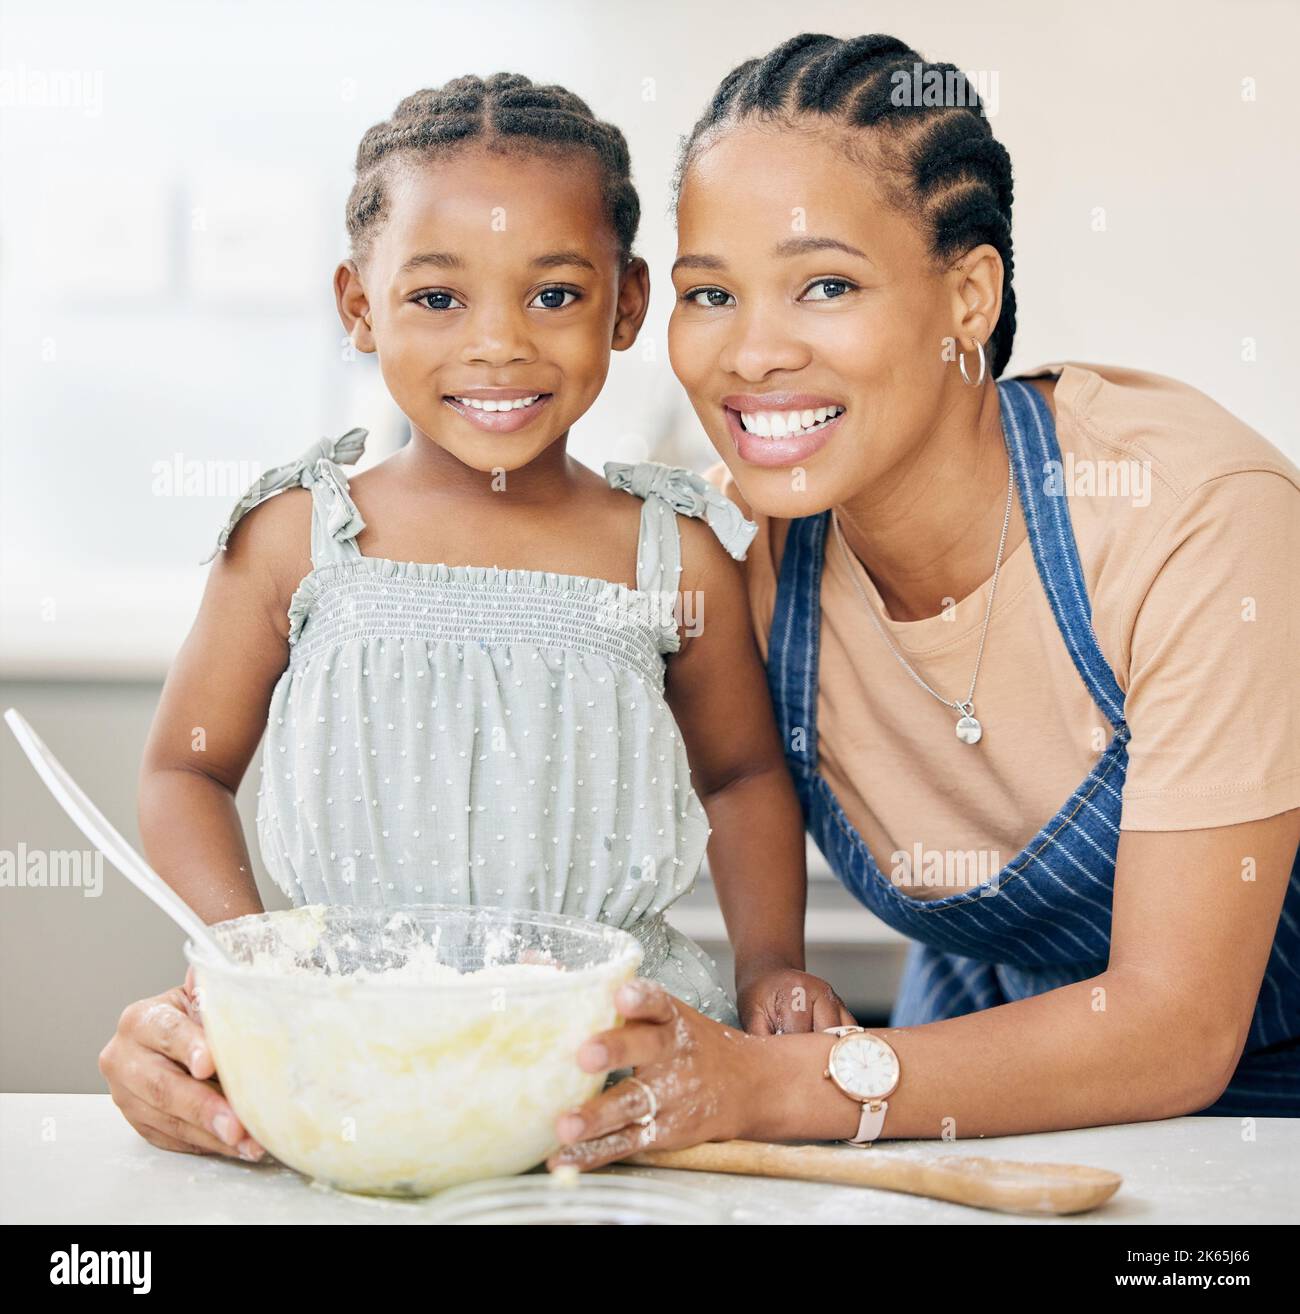 https://c8.alamy.com/comp/2K65J66/mum-knows-all-the-secrets-in-the-kitchen-an-attractive-young-mother-bonding-with-her-daughter-and-helping-her-bake-in-the-kitchen-at-home-2K65J66.jpg